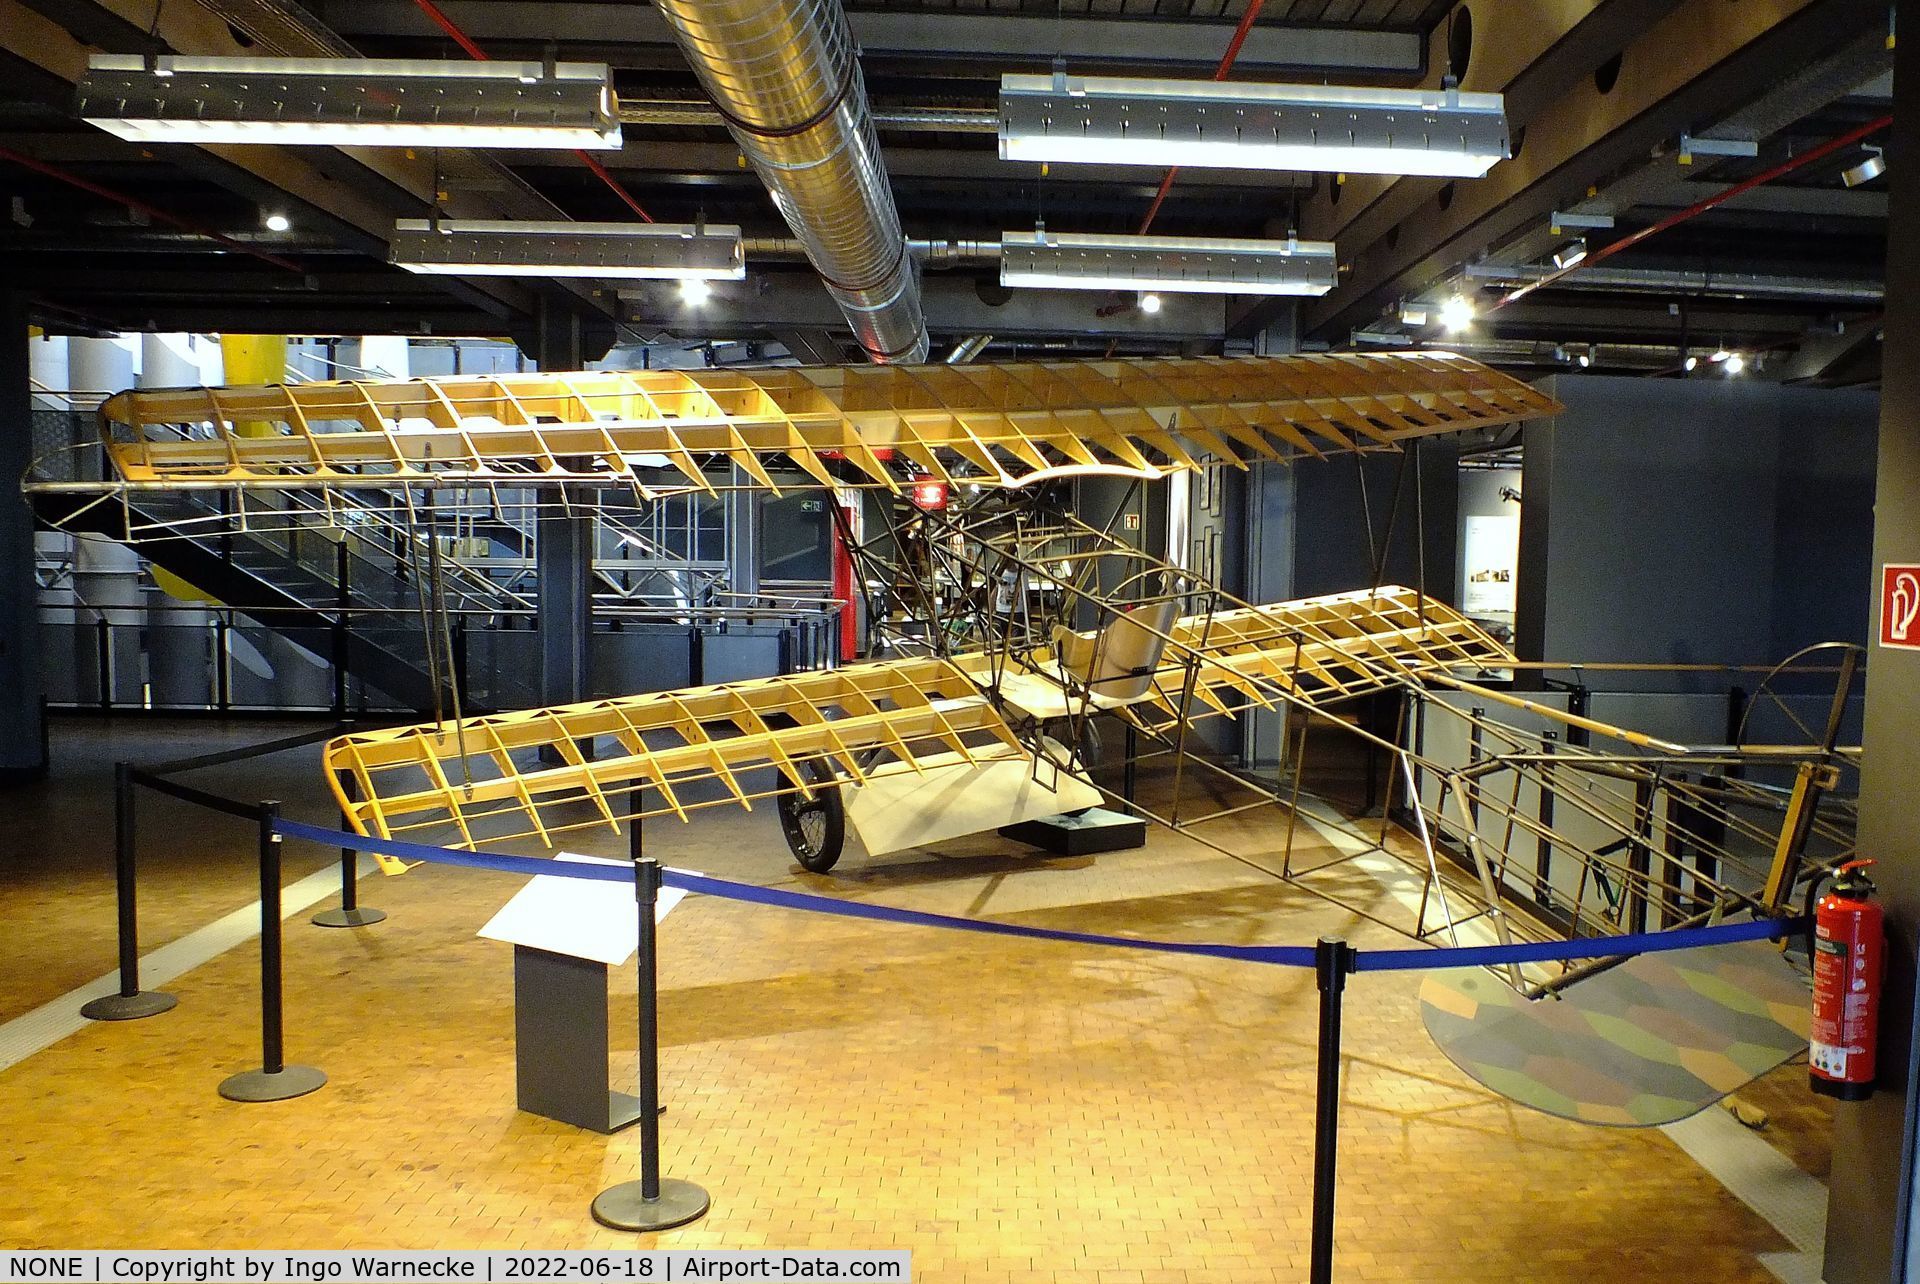 NONE, Fokker D VII replica C/N 001, Fokker D VII structural reconstruction (minus engine, cockpit instruments, outer skin and controls) at the Deutsches-Technikmuseum (DTM), Berlin